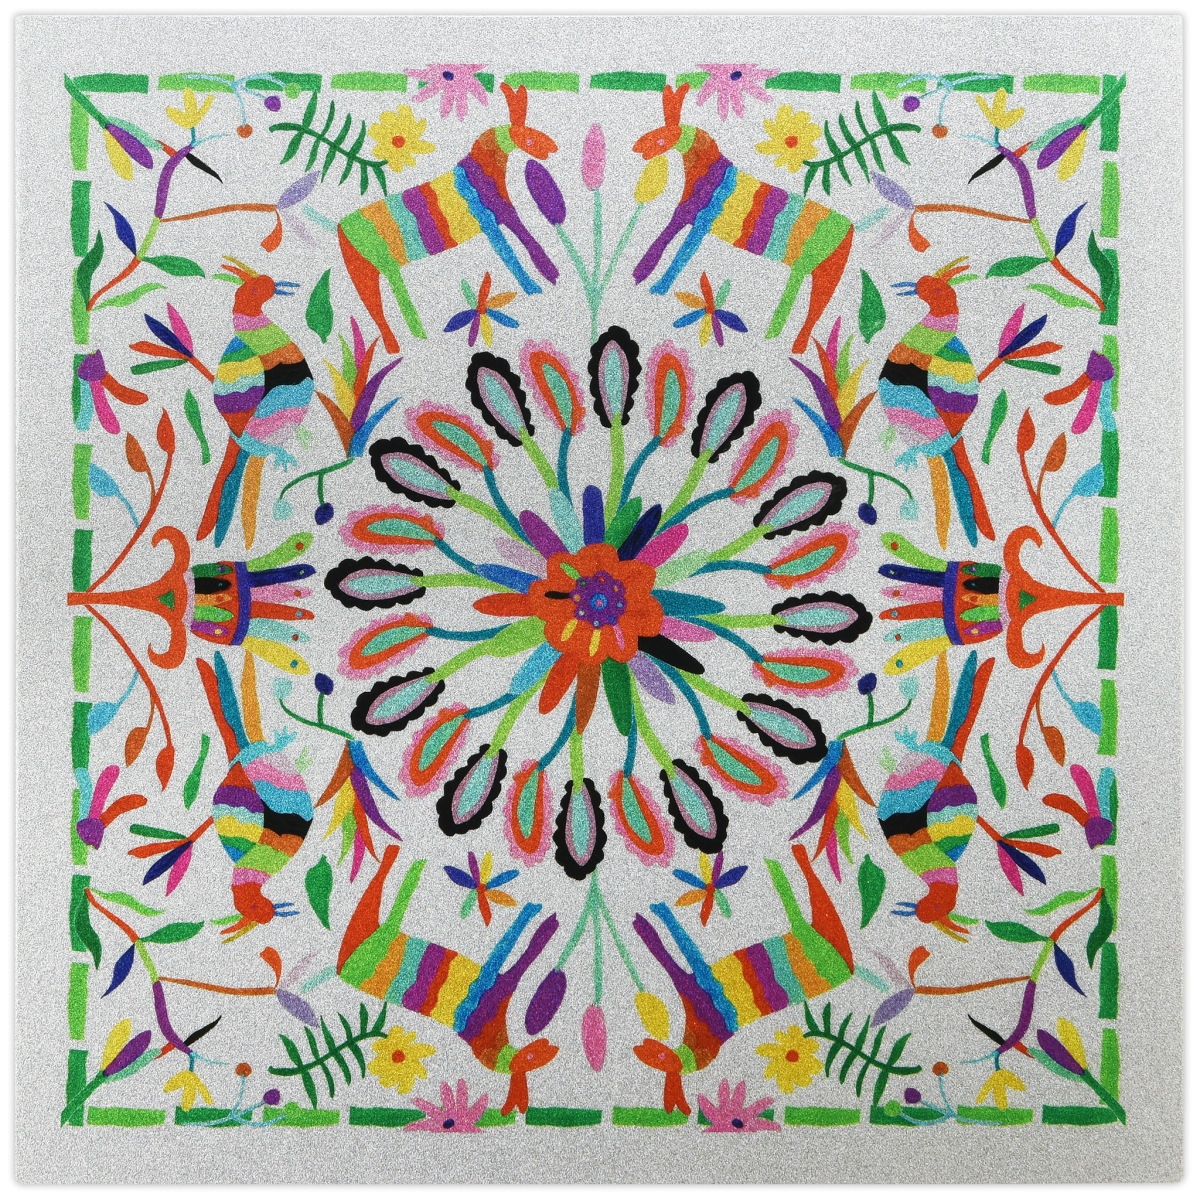 Egls-122573-3636 36 X 36 In. Colorful Abstract High Resolution Graphic Art Print On Wrapped Canvas Wall Art